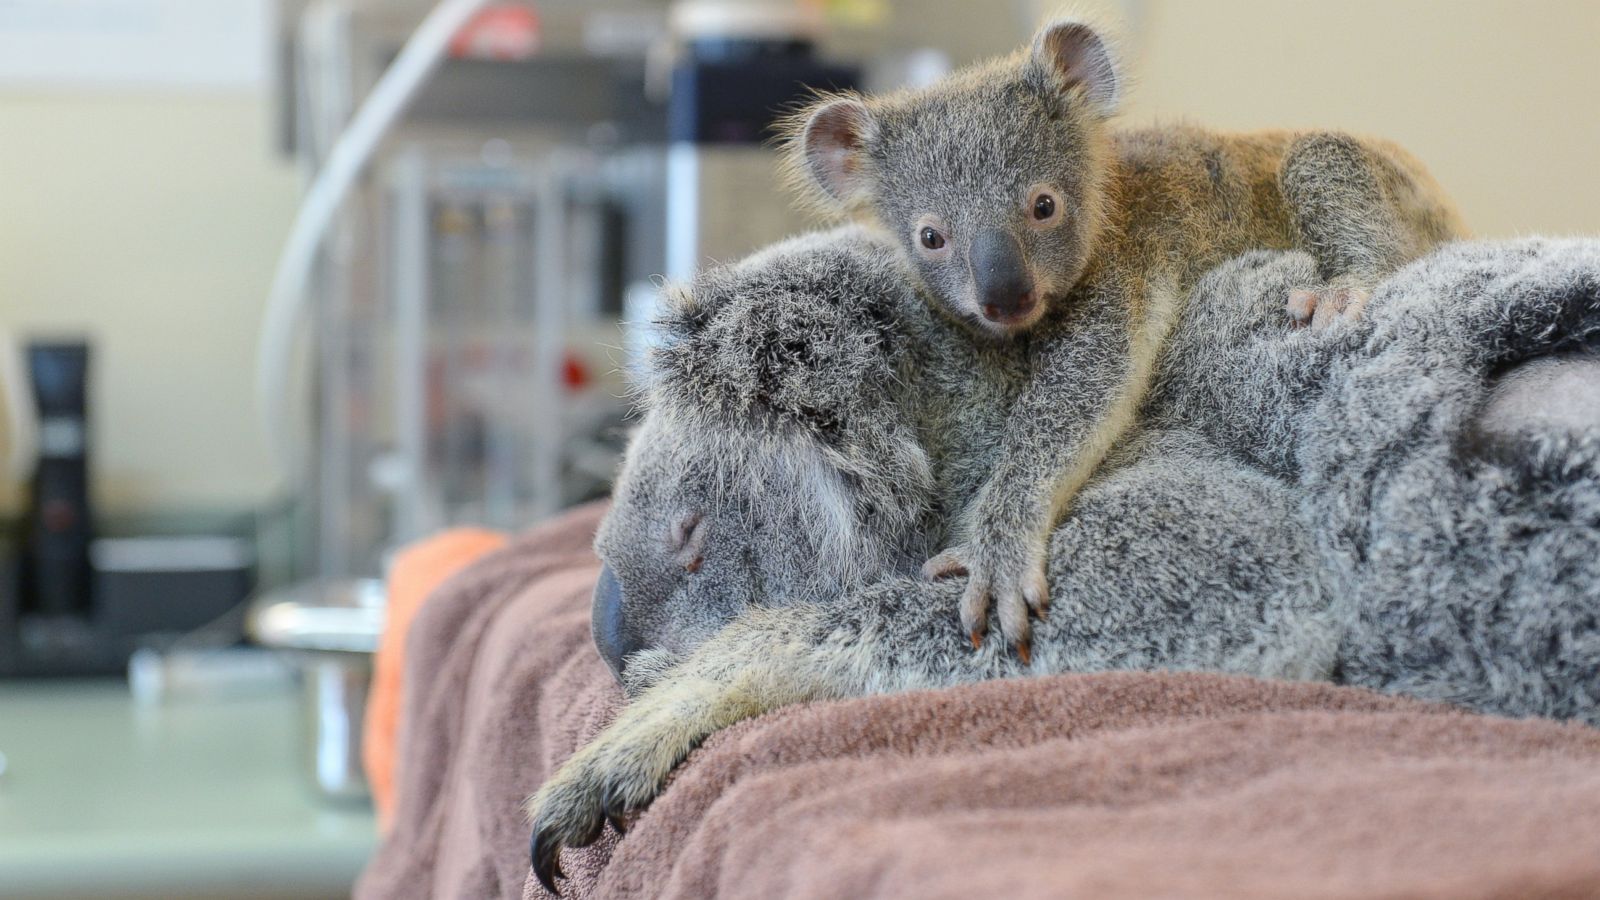 Baby Koala Hugs Mom During Surgery After They Were Hit by Car In Australia